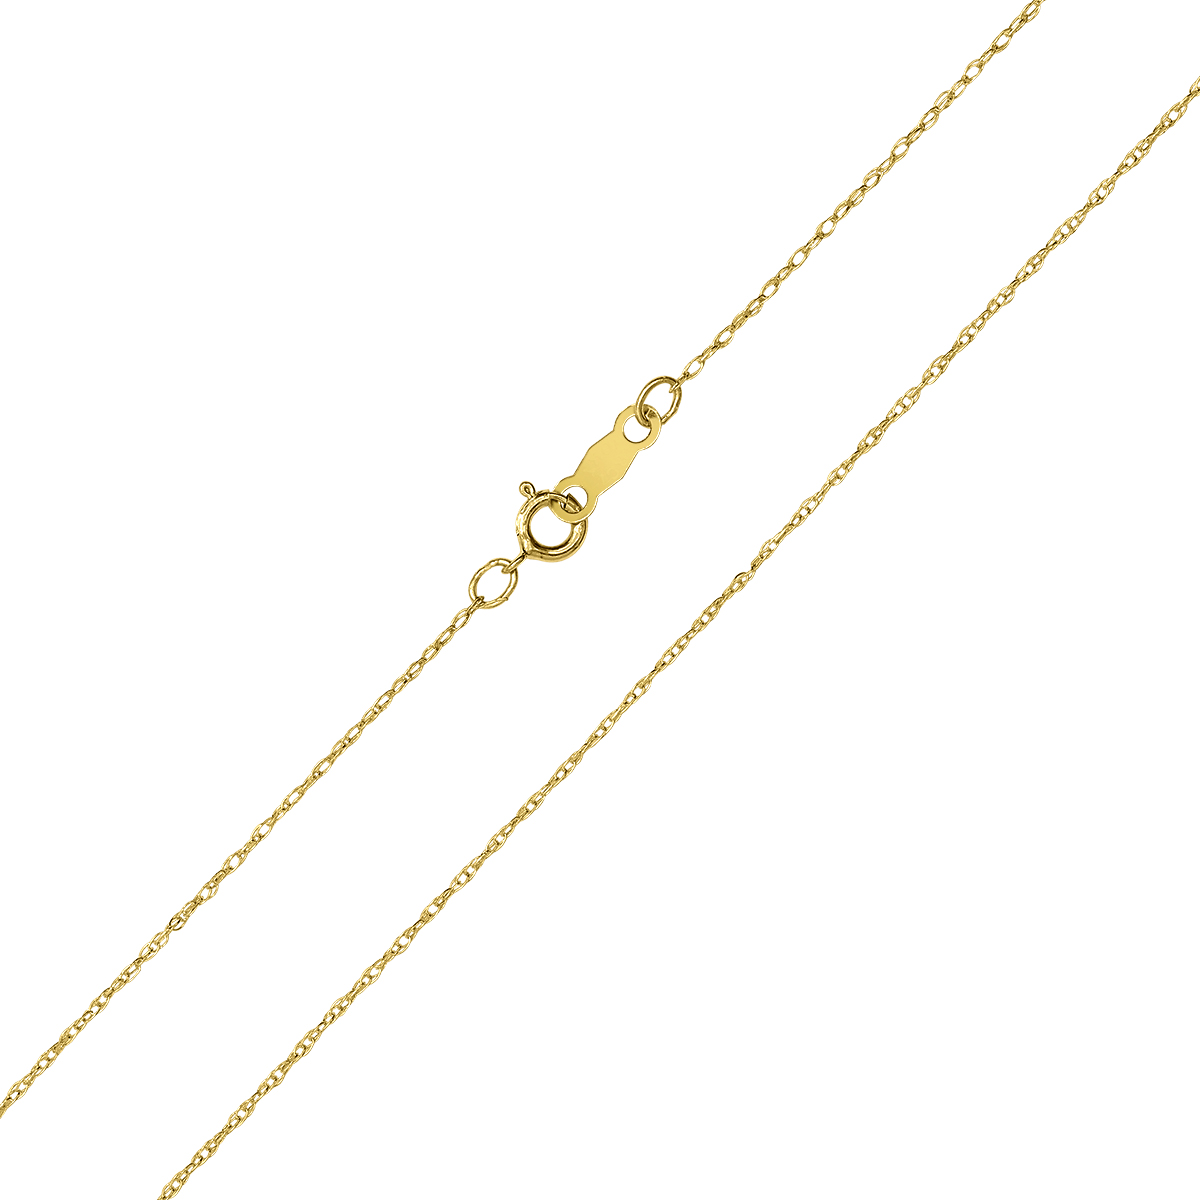 10K Yellow Gold .7MM Shiny Carded Rope Chain with Spring Ring Clasp - 16 Inch